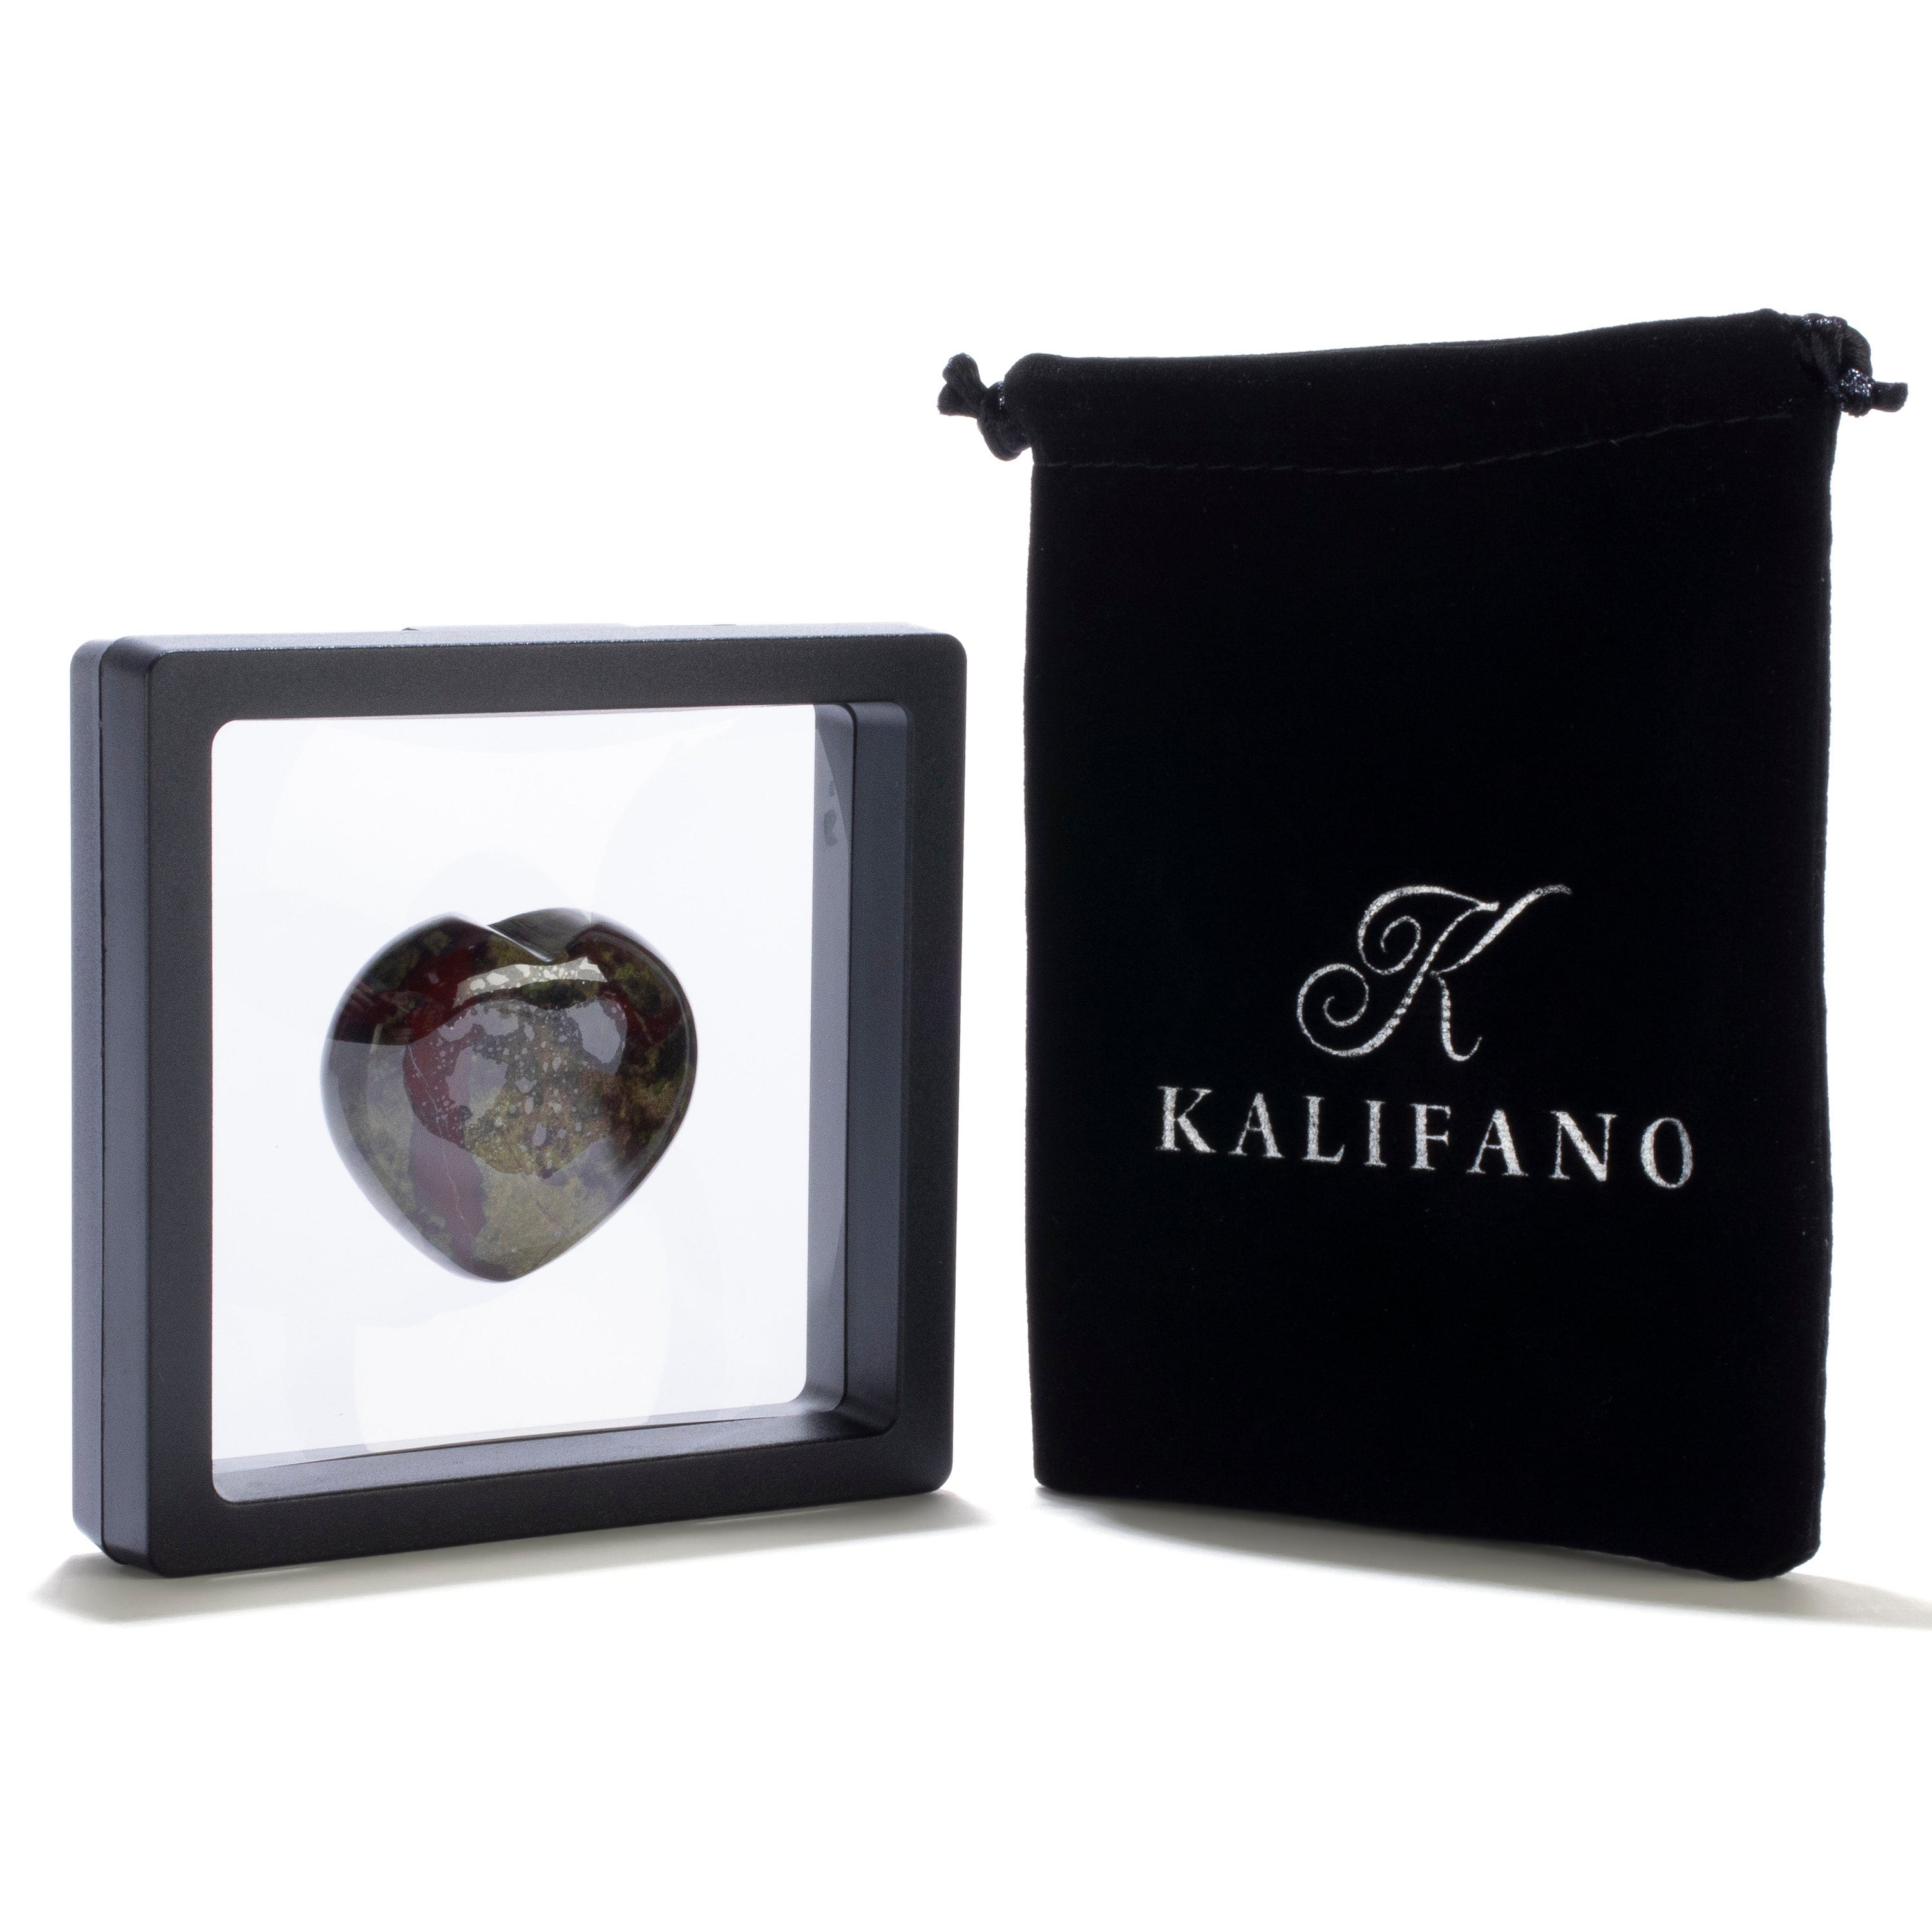 Kalifano Gemstone Carvings Bloodstone Heart Carving GH40-BS